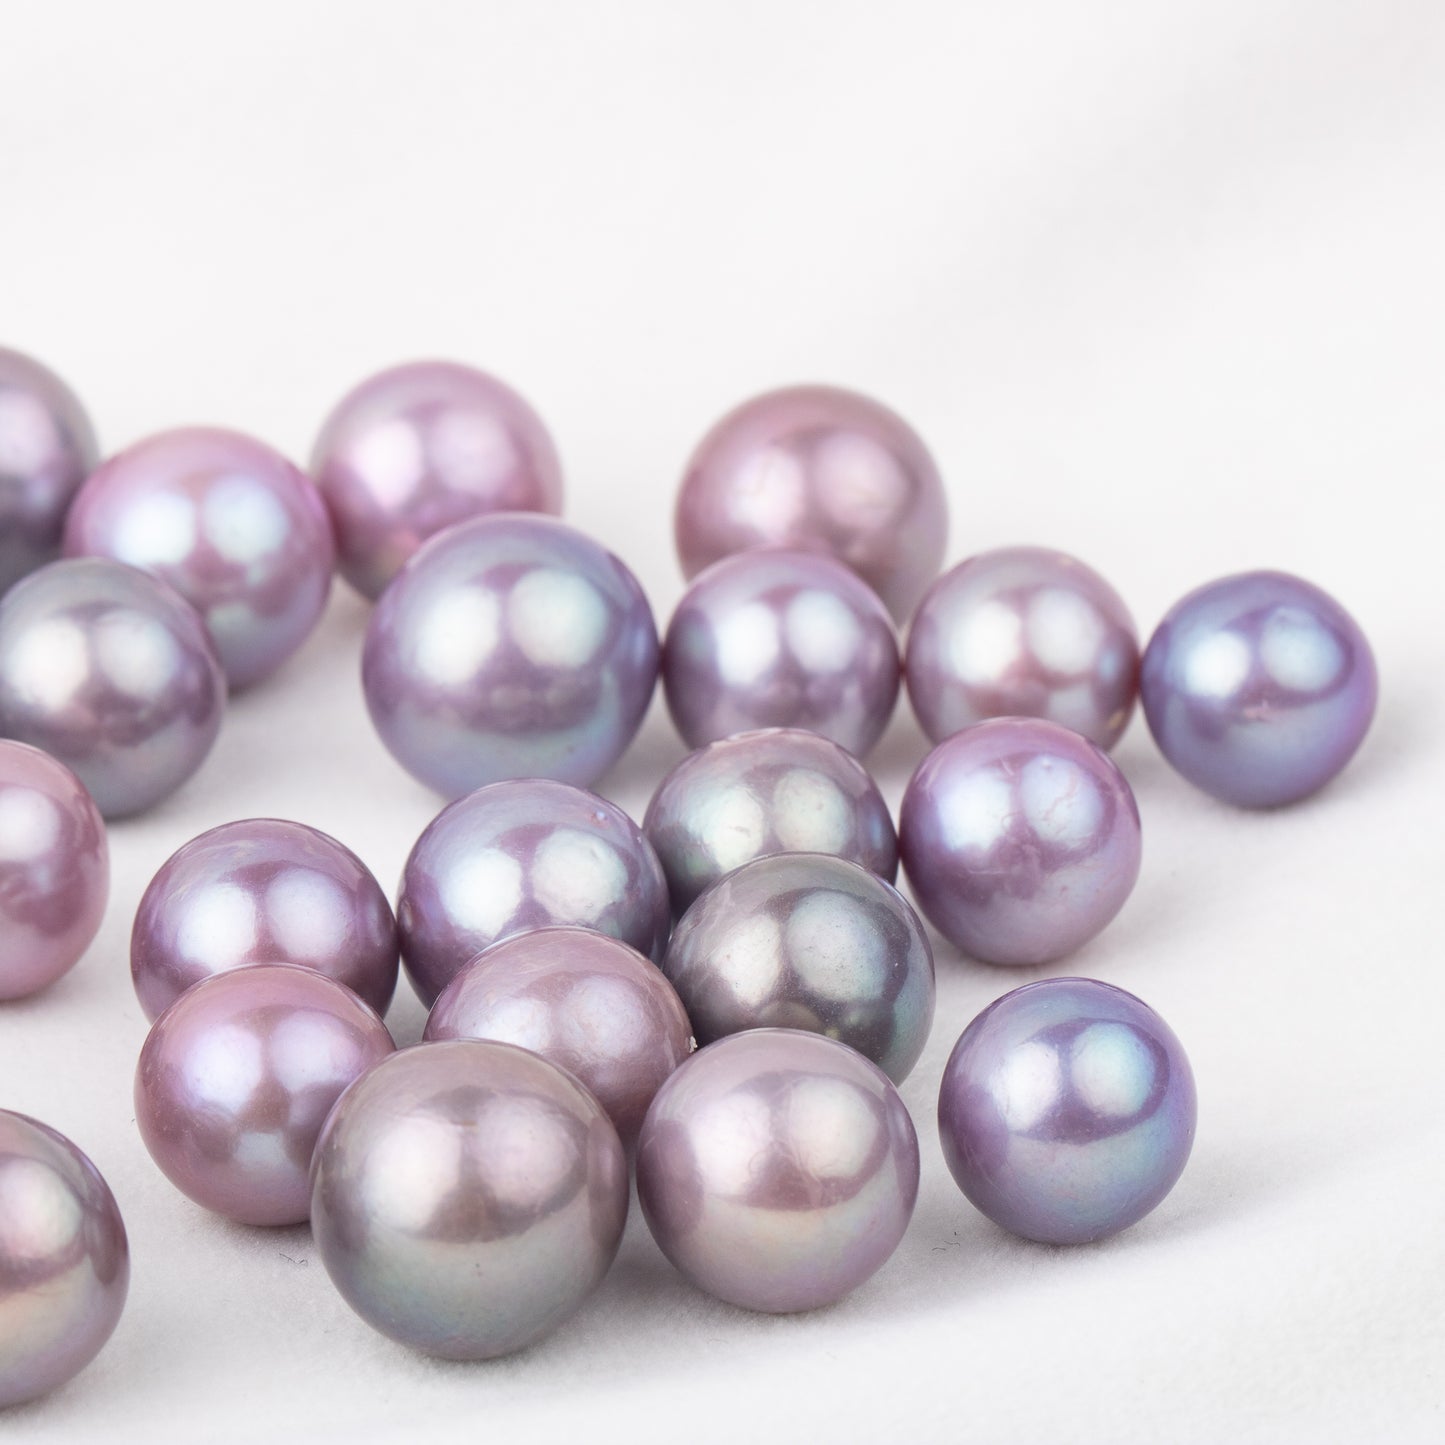 9-12mm cultured purple Edison Pearl High quality  loose freshwater pearl round shape